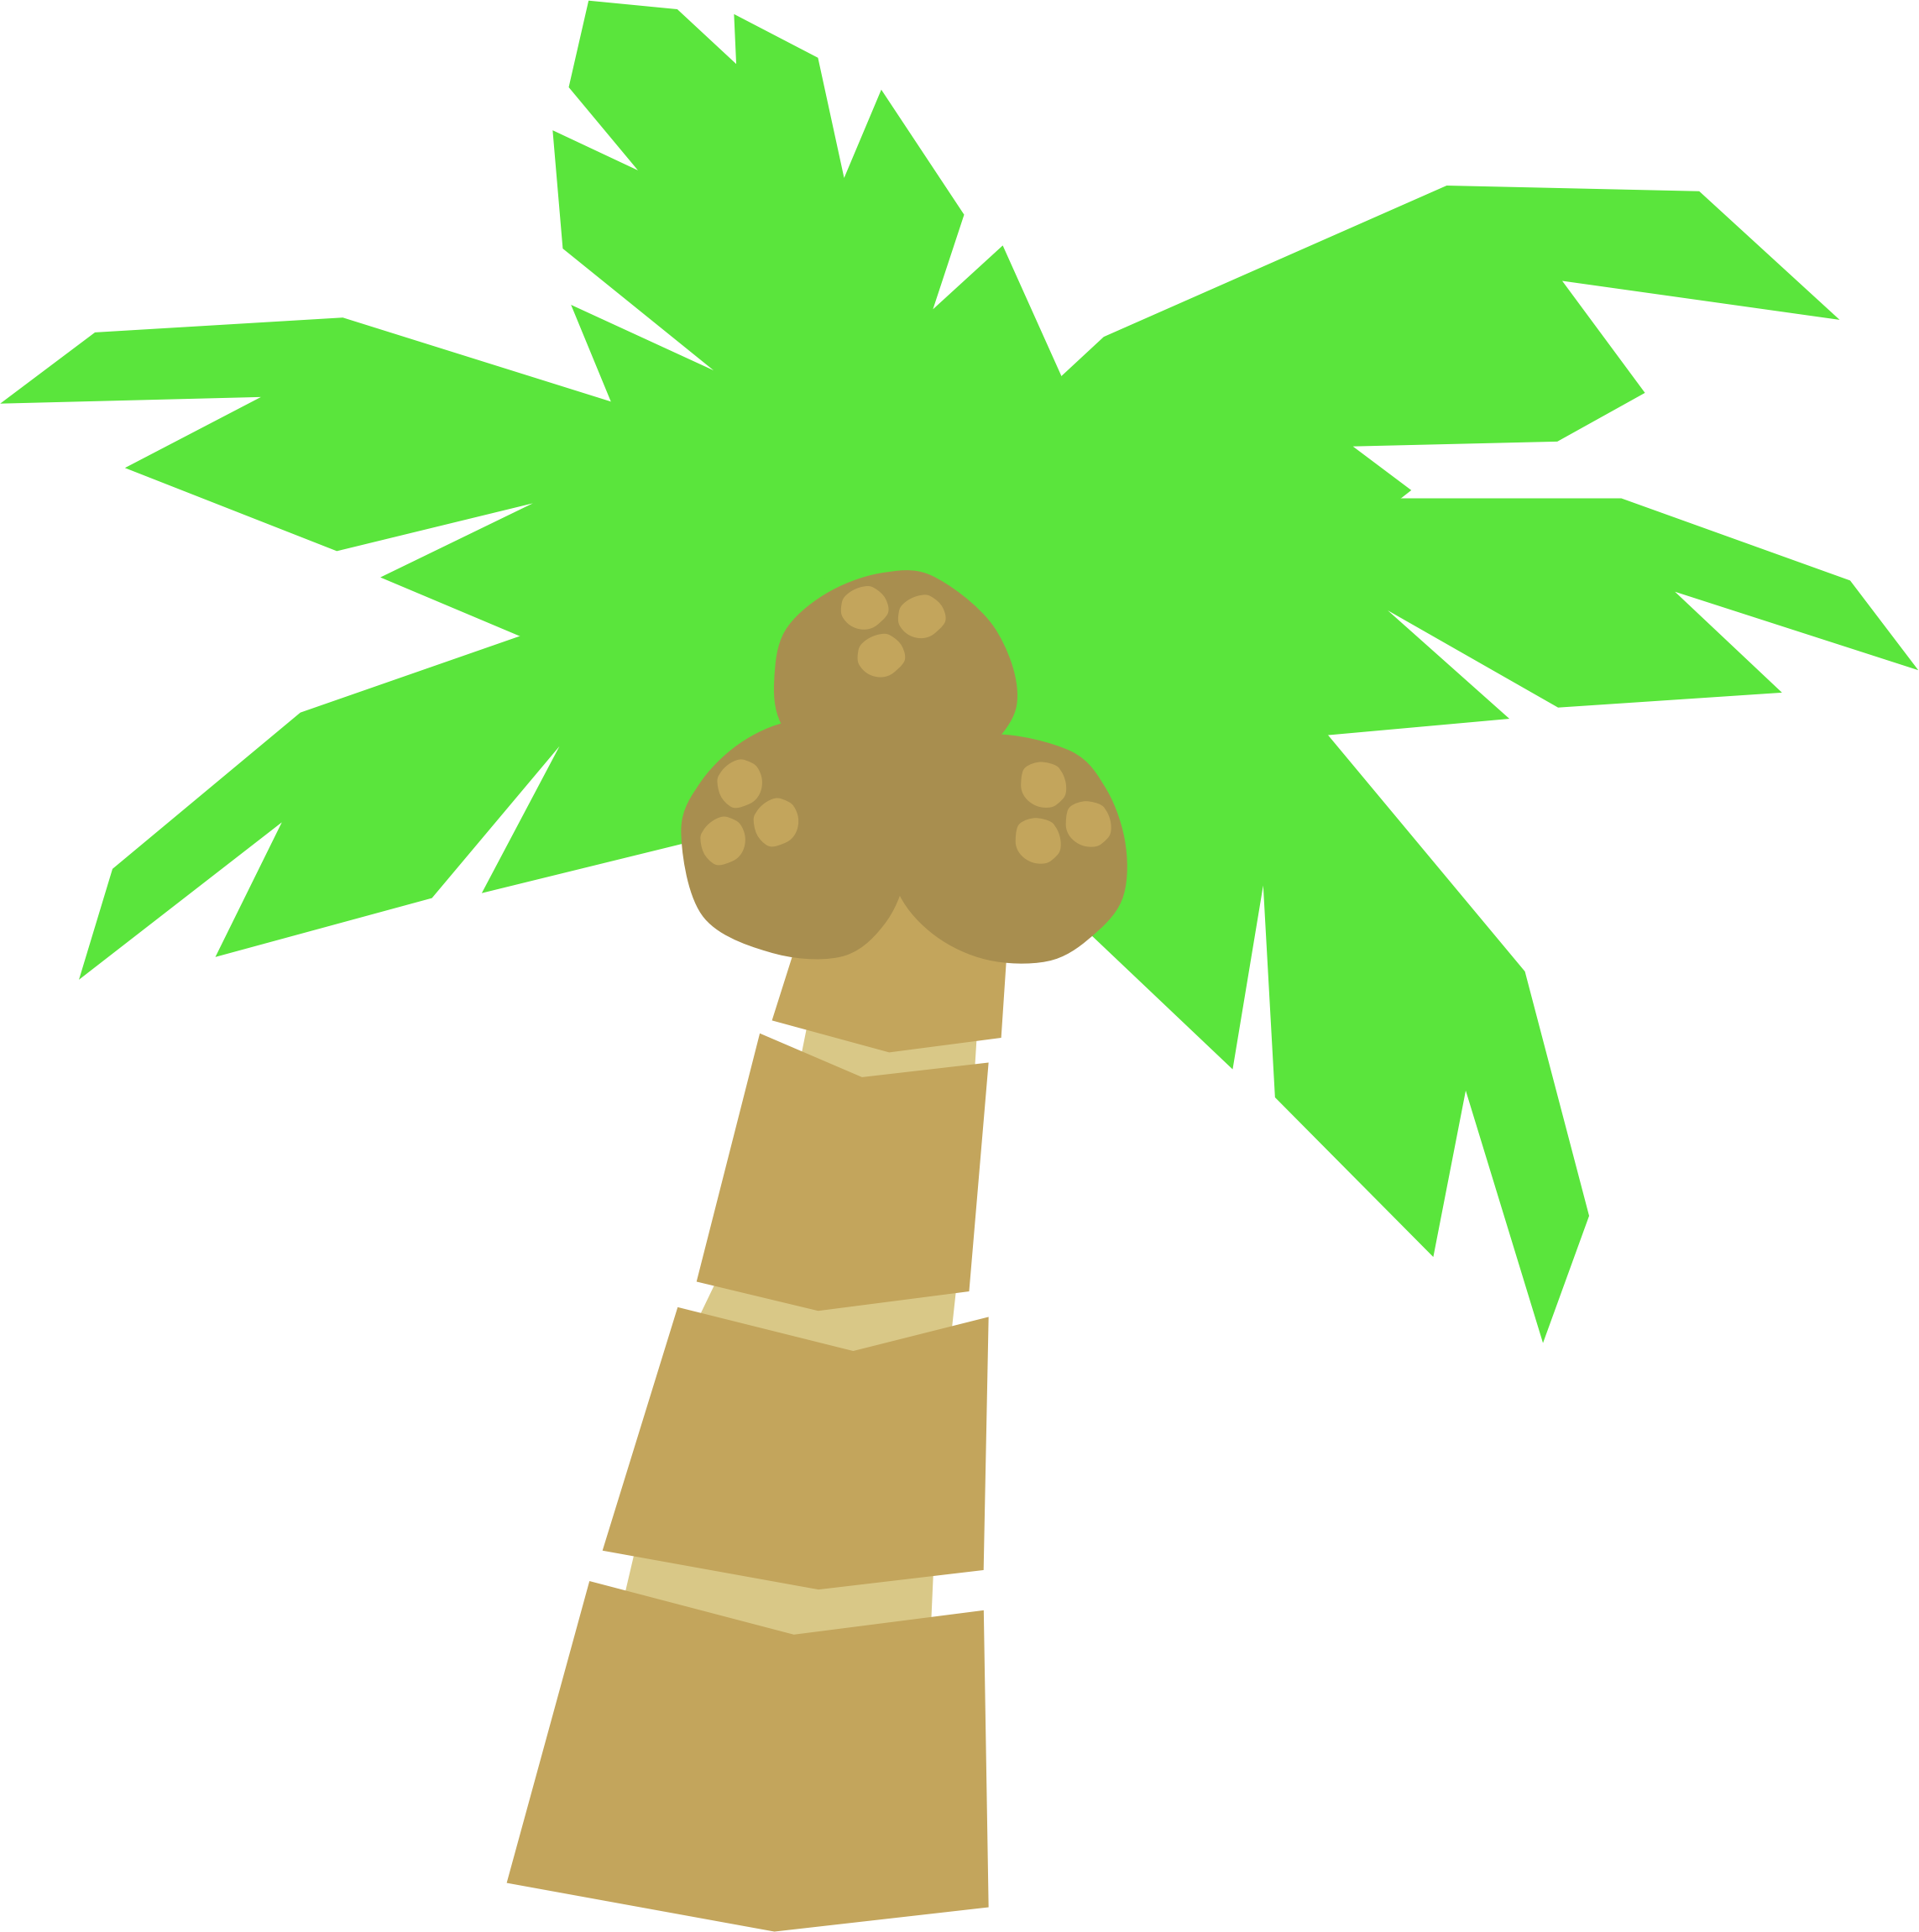 Palm tree clipart tropical palm tree vector